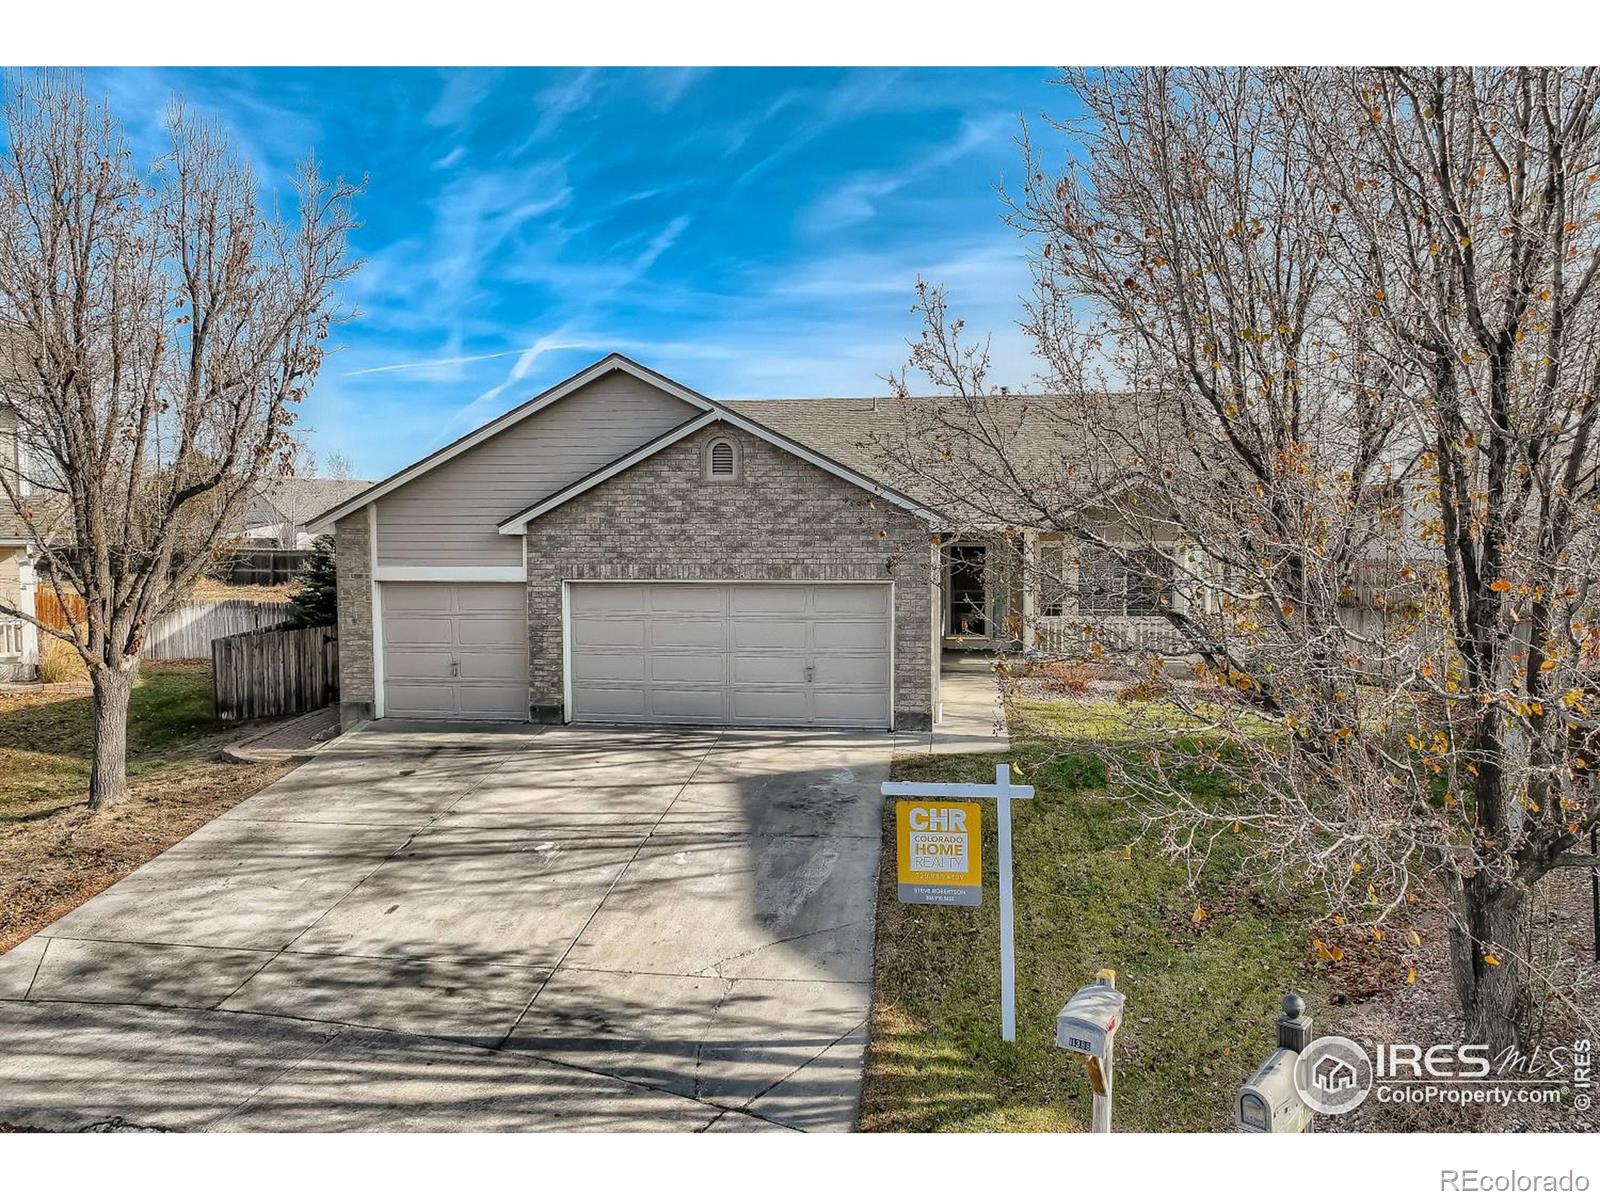 11388 E 116th Place, commerce city MLS: 456789979427 Beds: 3 Baths: 3 Price: $550,000